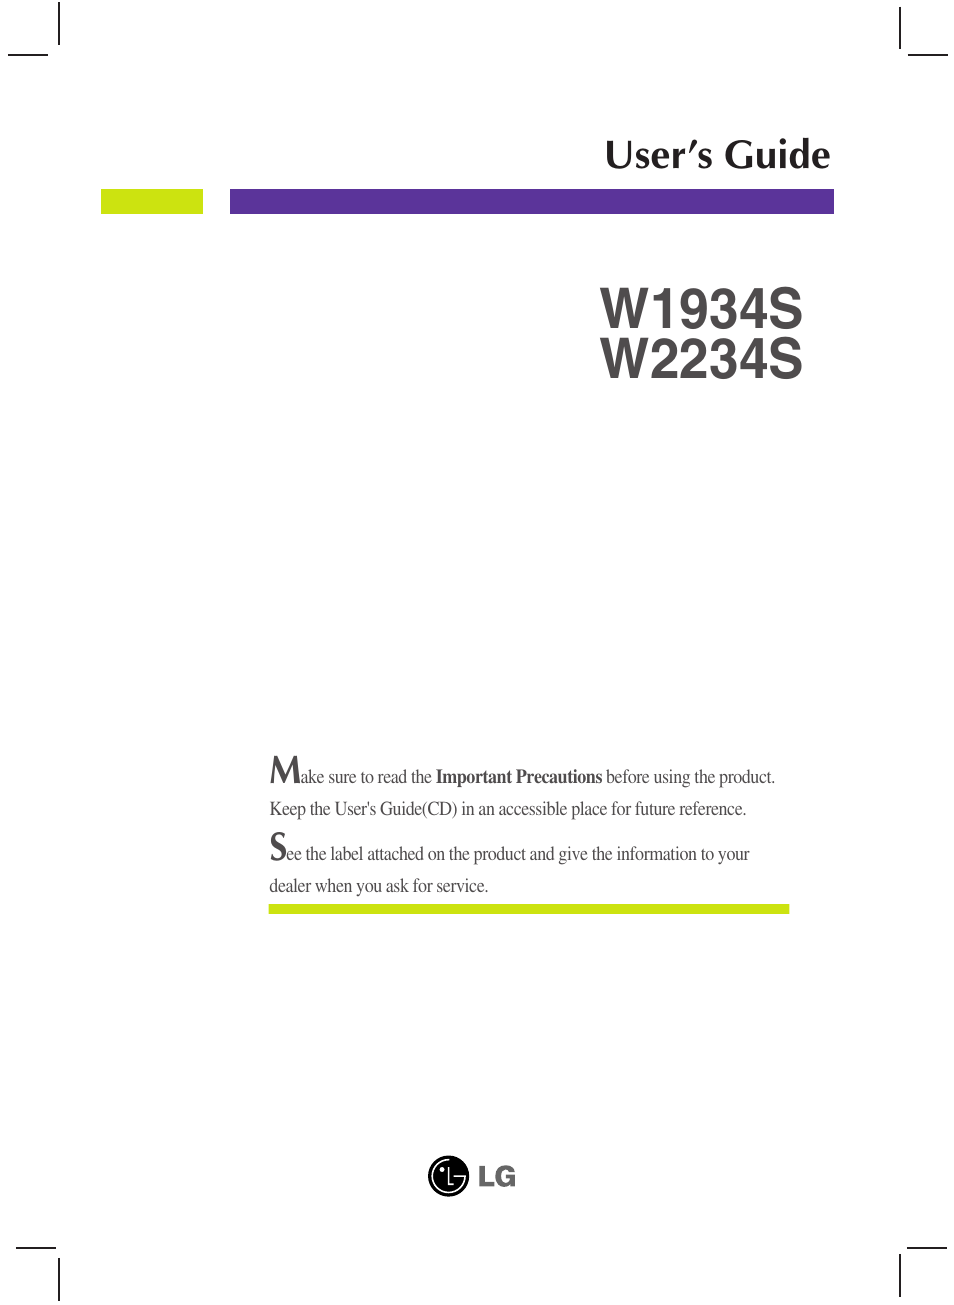 LG W2234S-BN User Manual | 24 pages